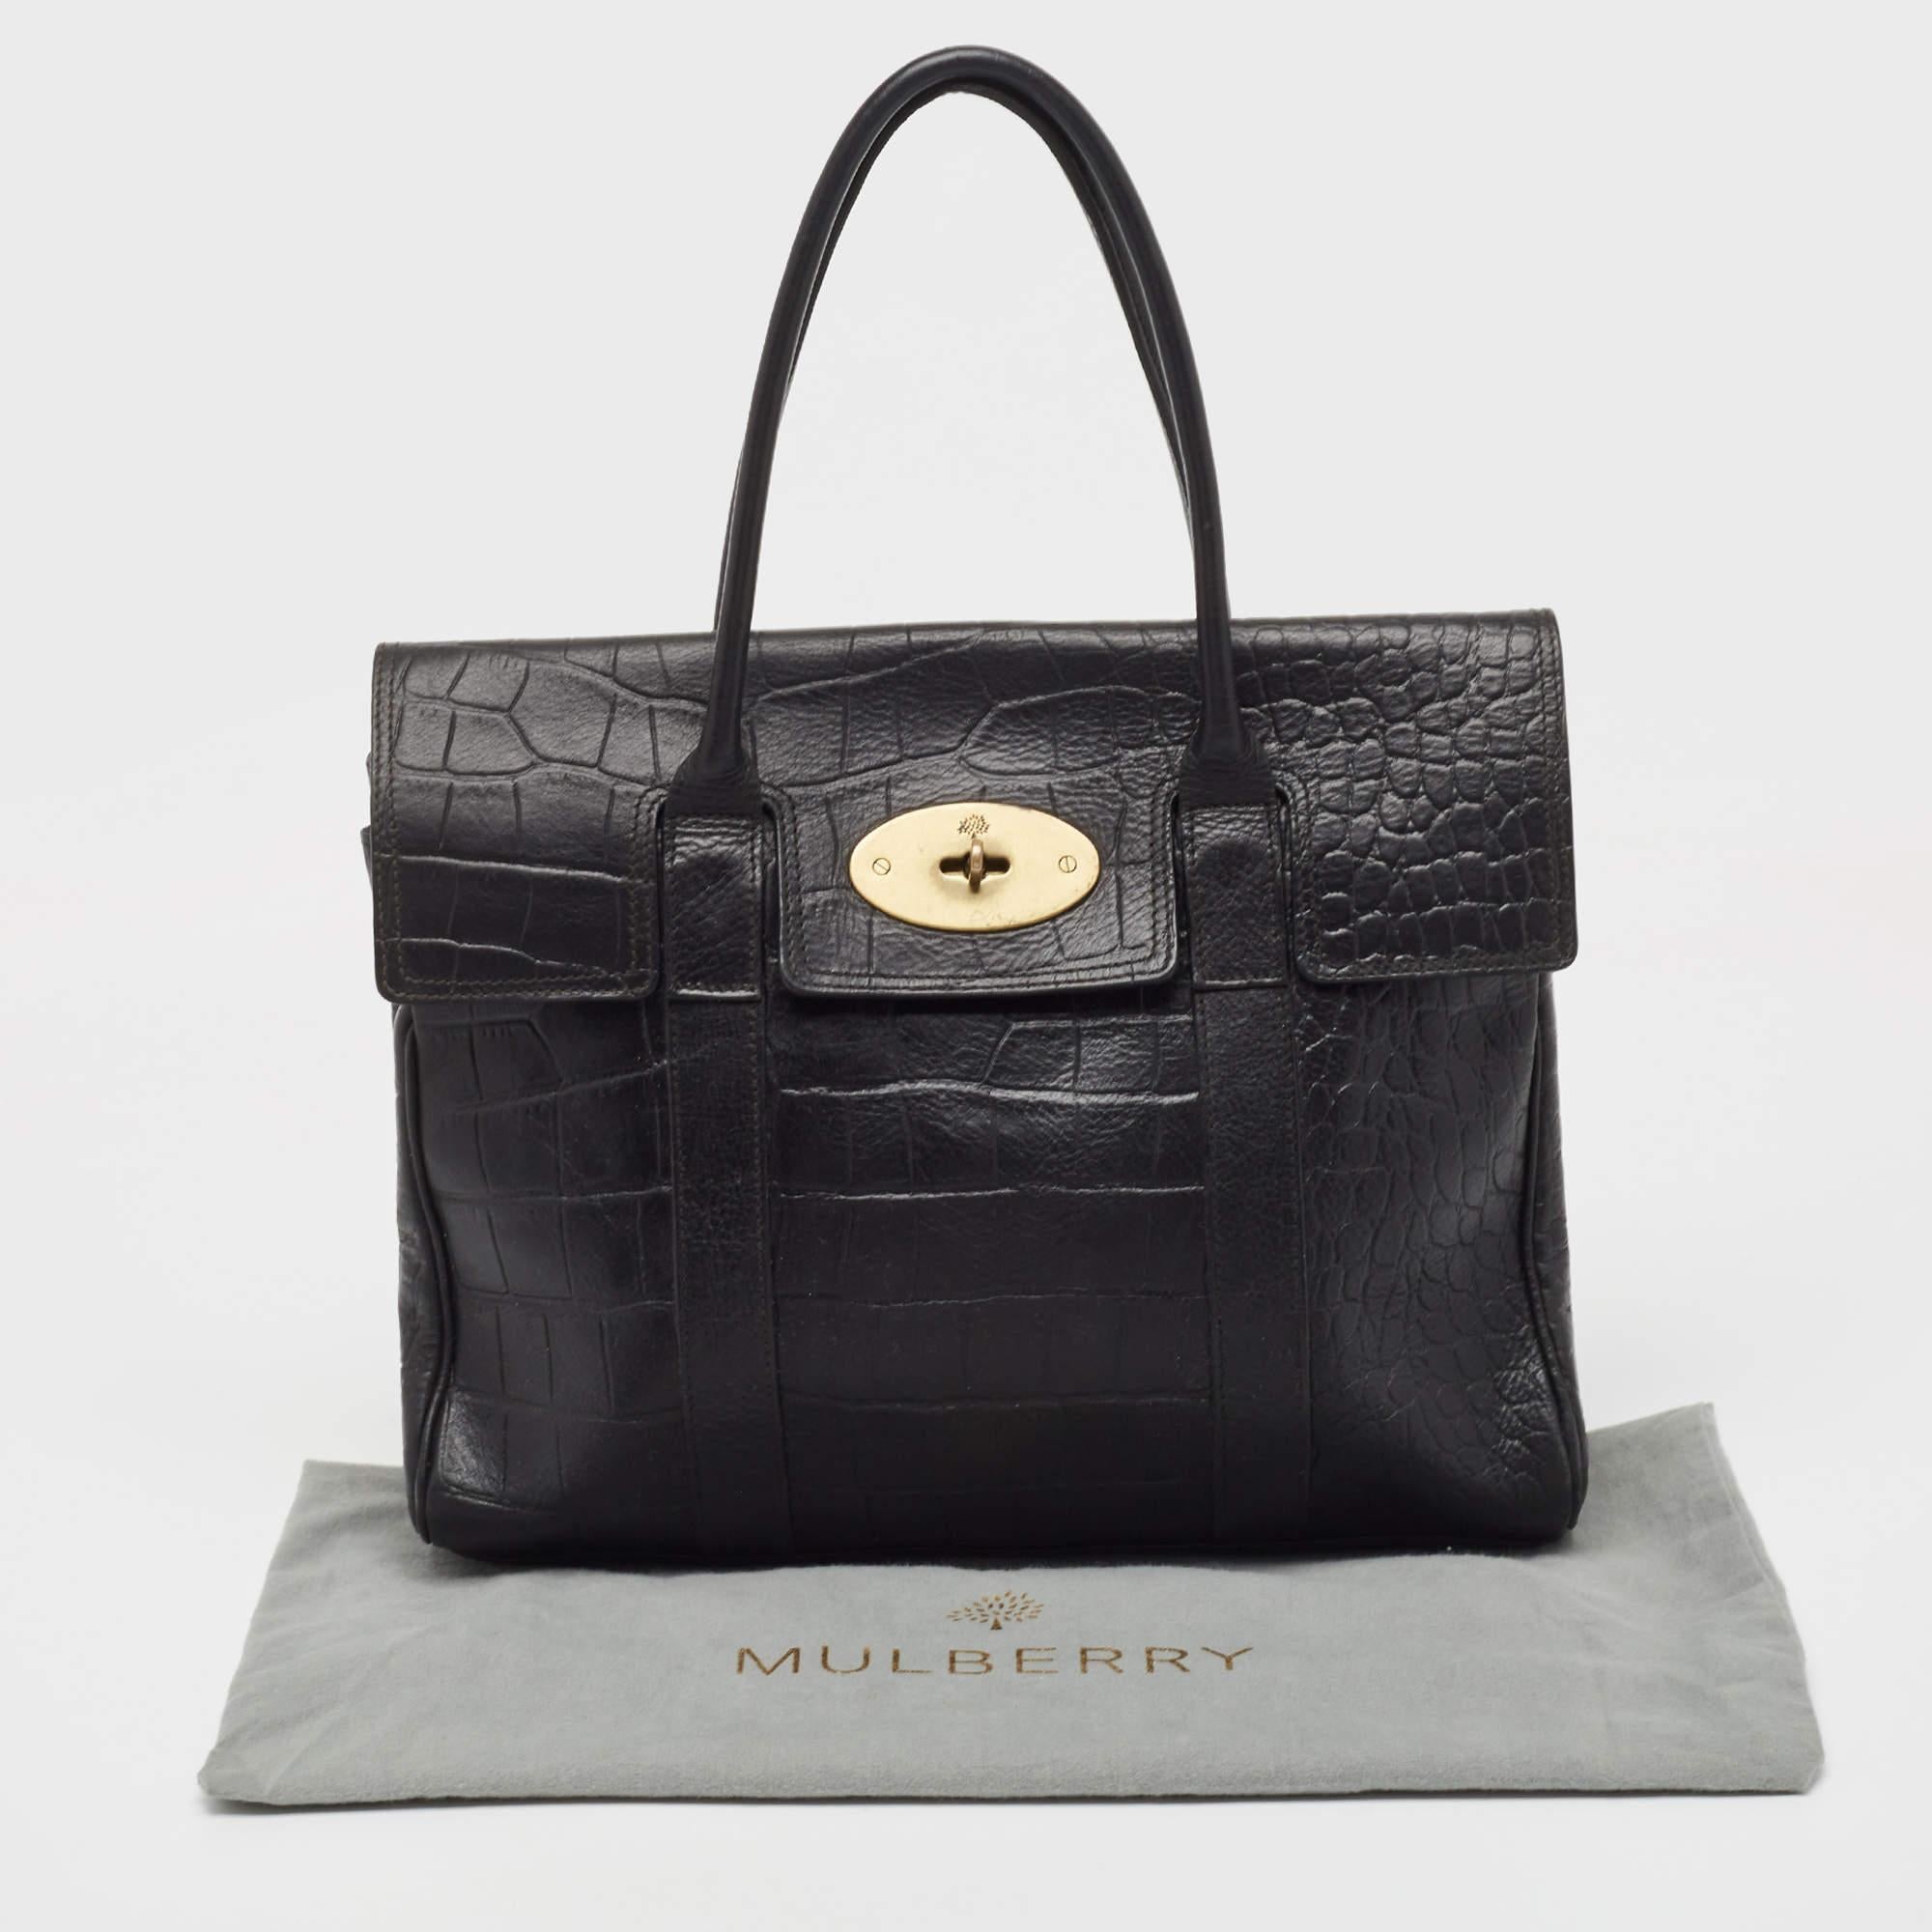 Mulberry Black Croc Embossed Leather Bayswater Satchel 4